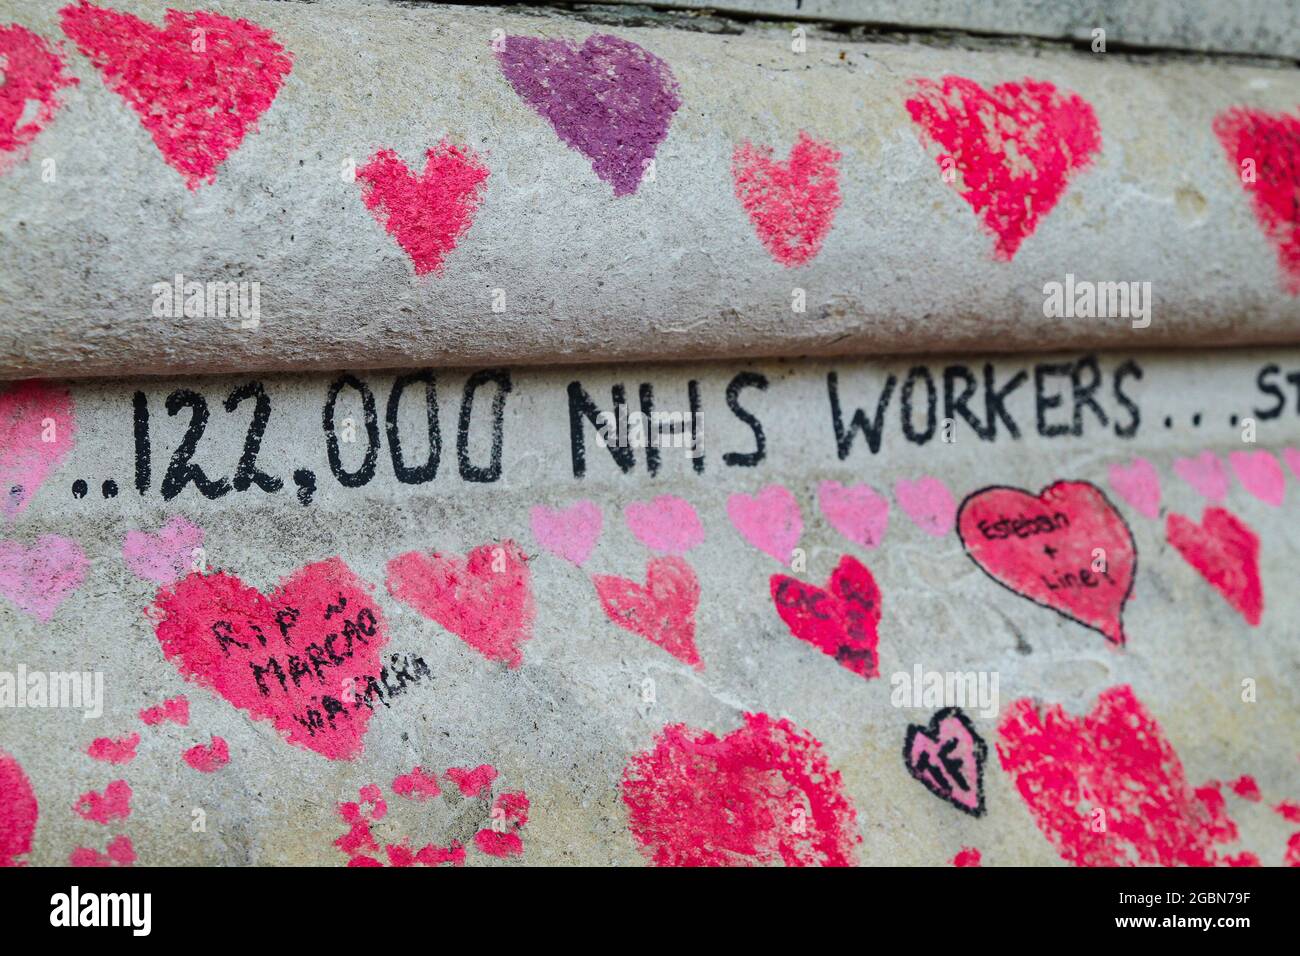 The words '122,000 NHS Workers..' inscribed amidst the thousands of hearts on the Covid19 memorial wall.  The National Covid Memorial Wall runs for about a mile along the Thames river alongside St Thomas' hospital in Westminster. The memorial began around April 2021 and its decorated with more than 150,000 red hearts each representing a life lost to Covid19. (Photo by David Mbiyu / SOPA Images/Sipa USA) Stock Photo